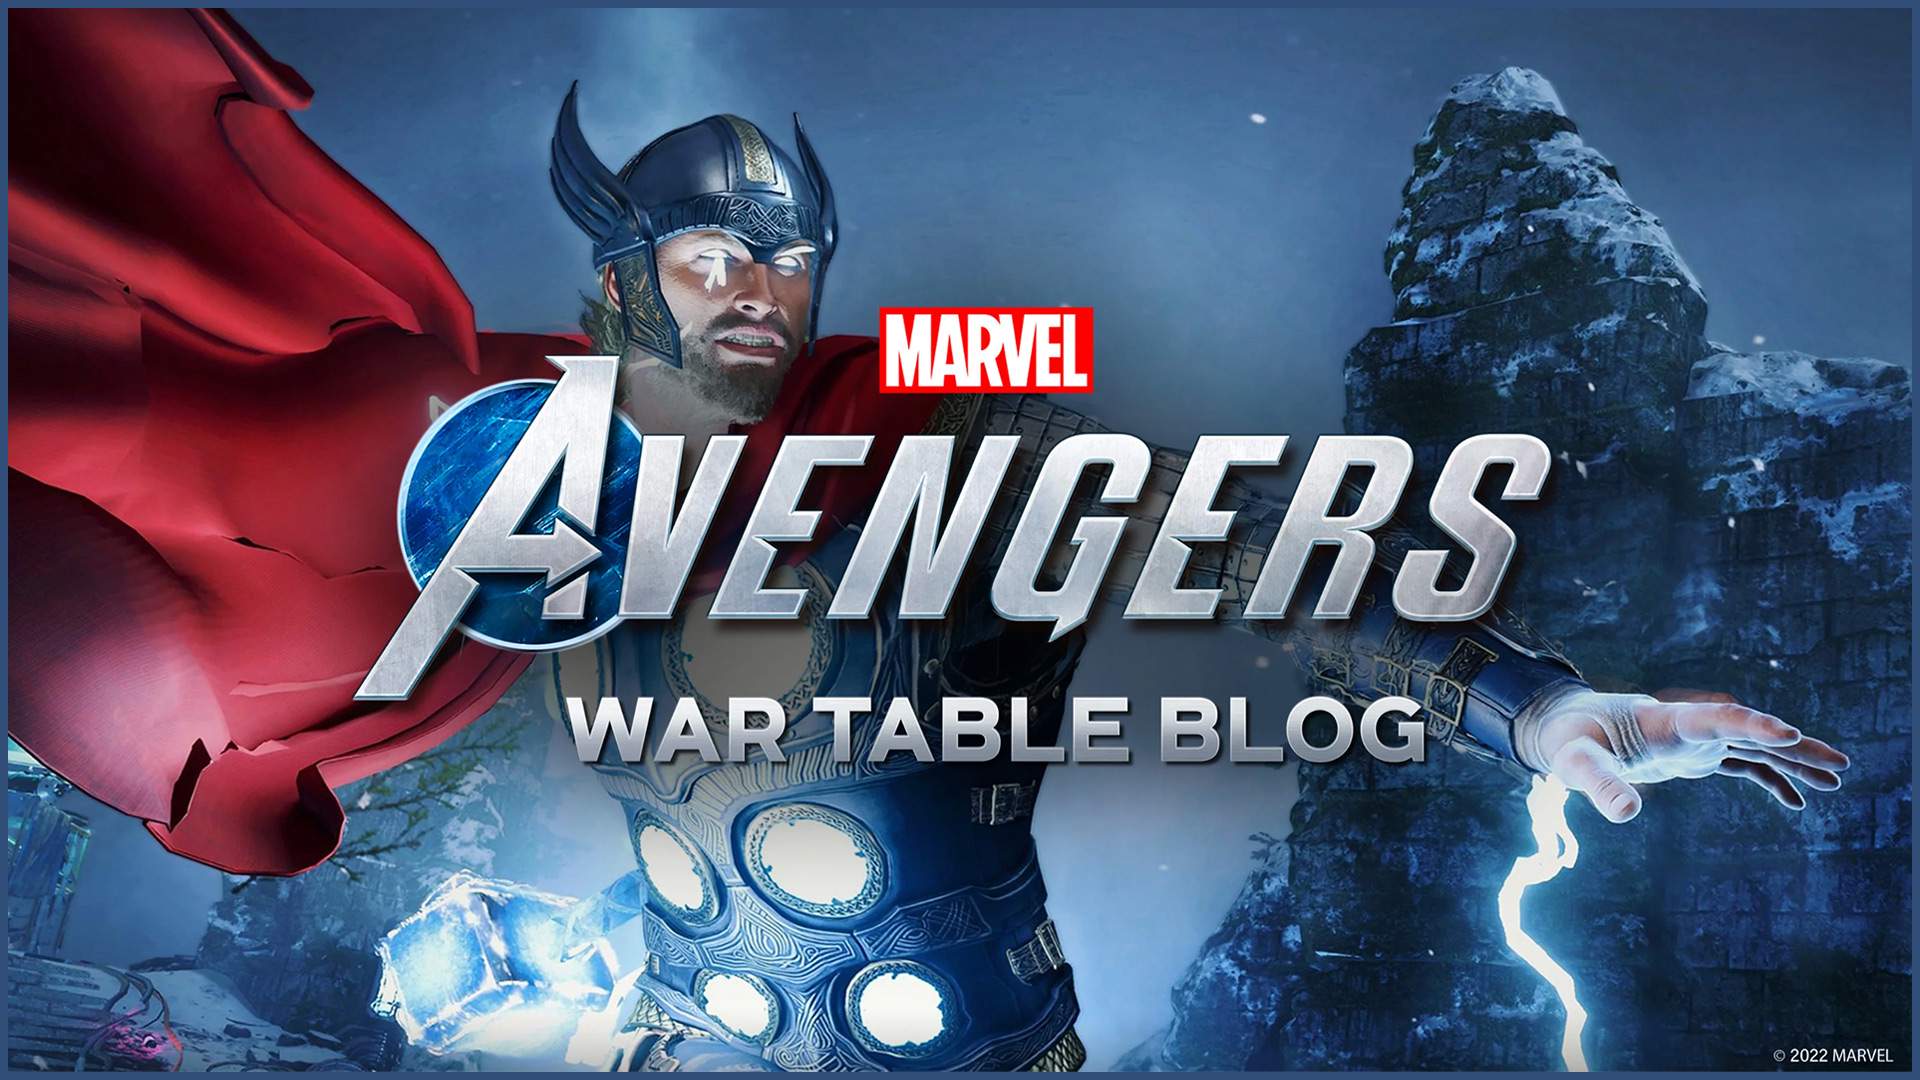 Marvel's Avengers WAR TABLE Weekly Blog #86